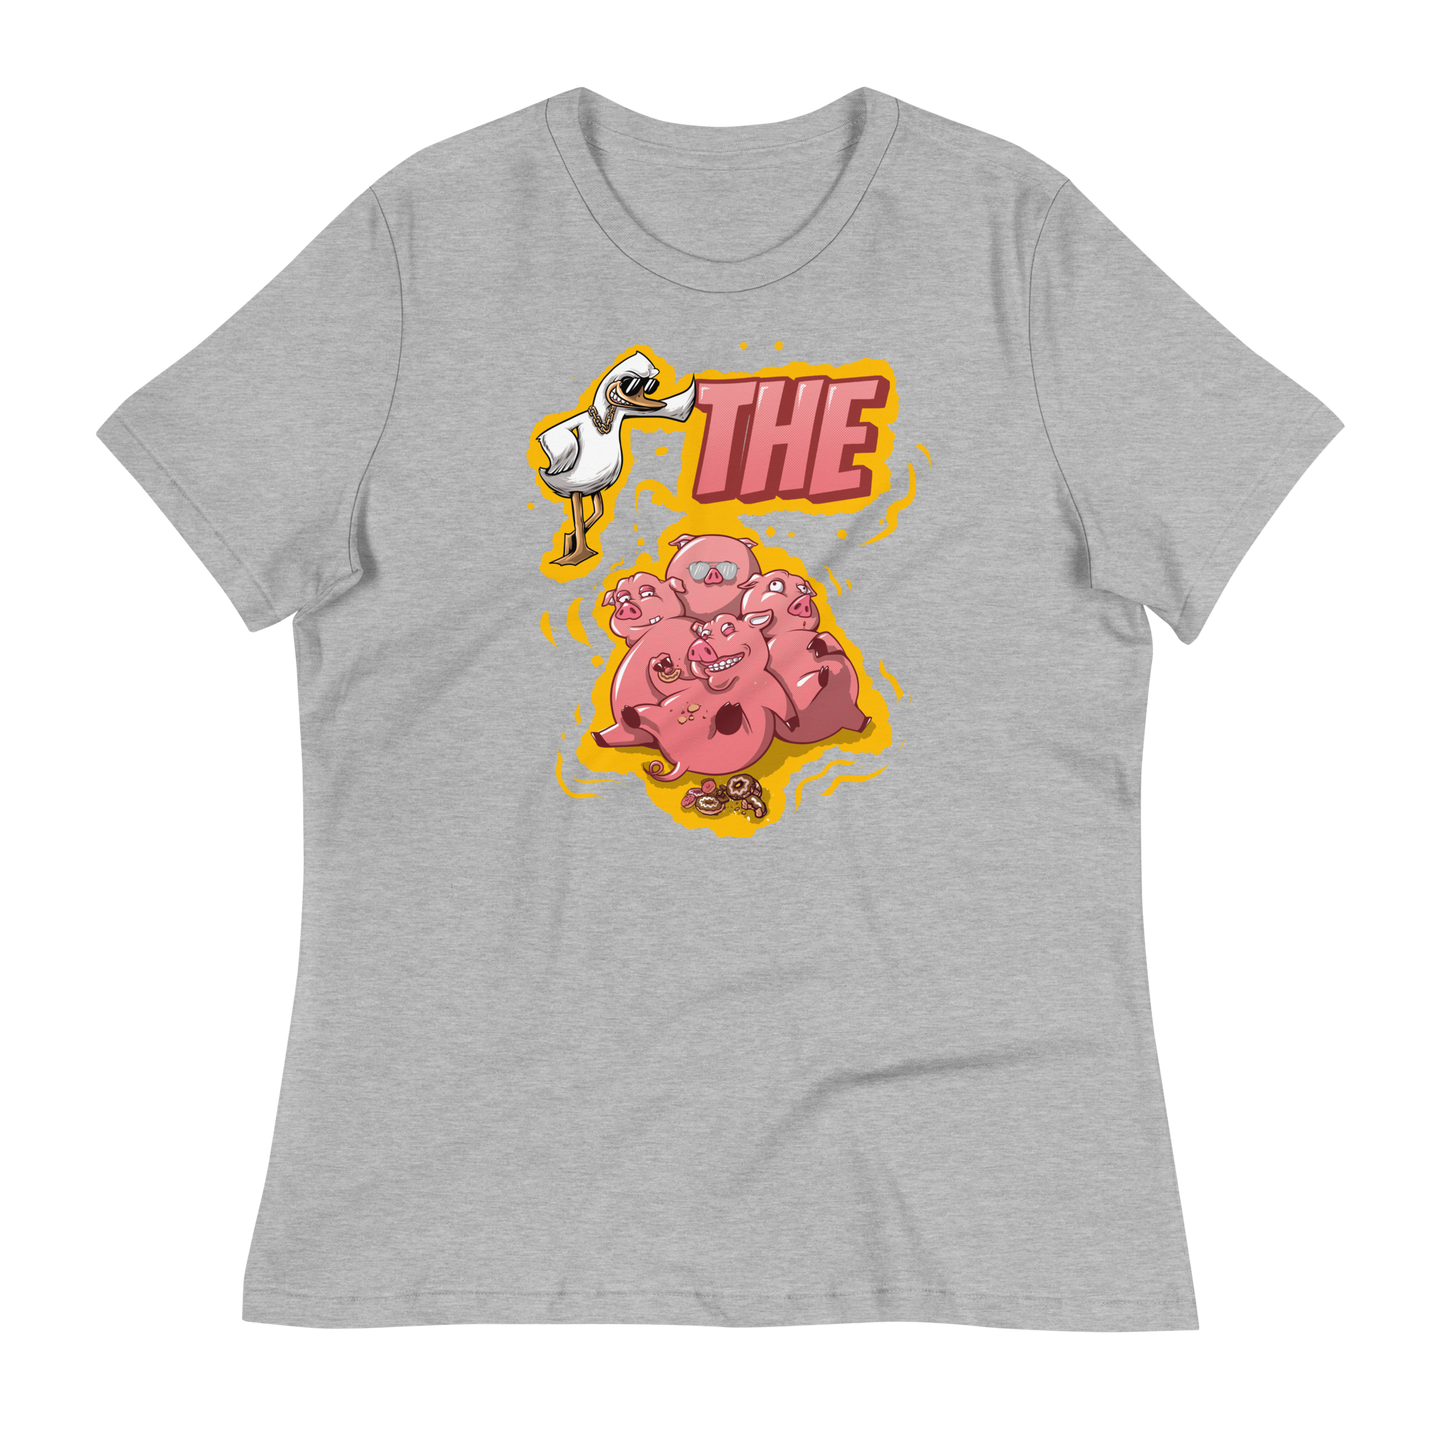 A-Hole "Duck The Pigs" Women's Relaxed T-Shirt